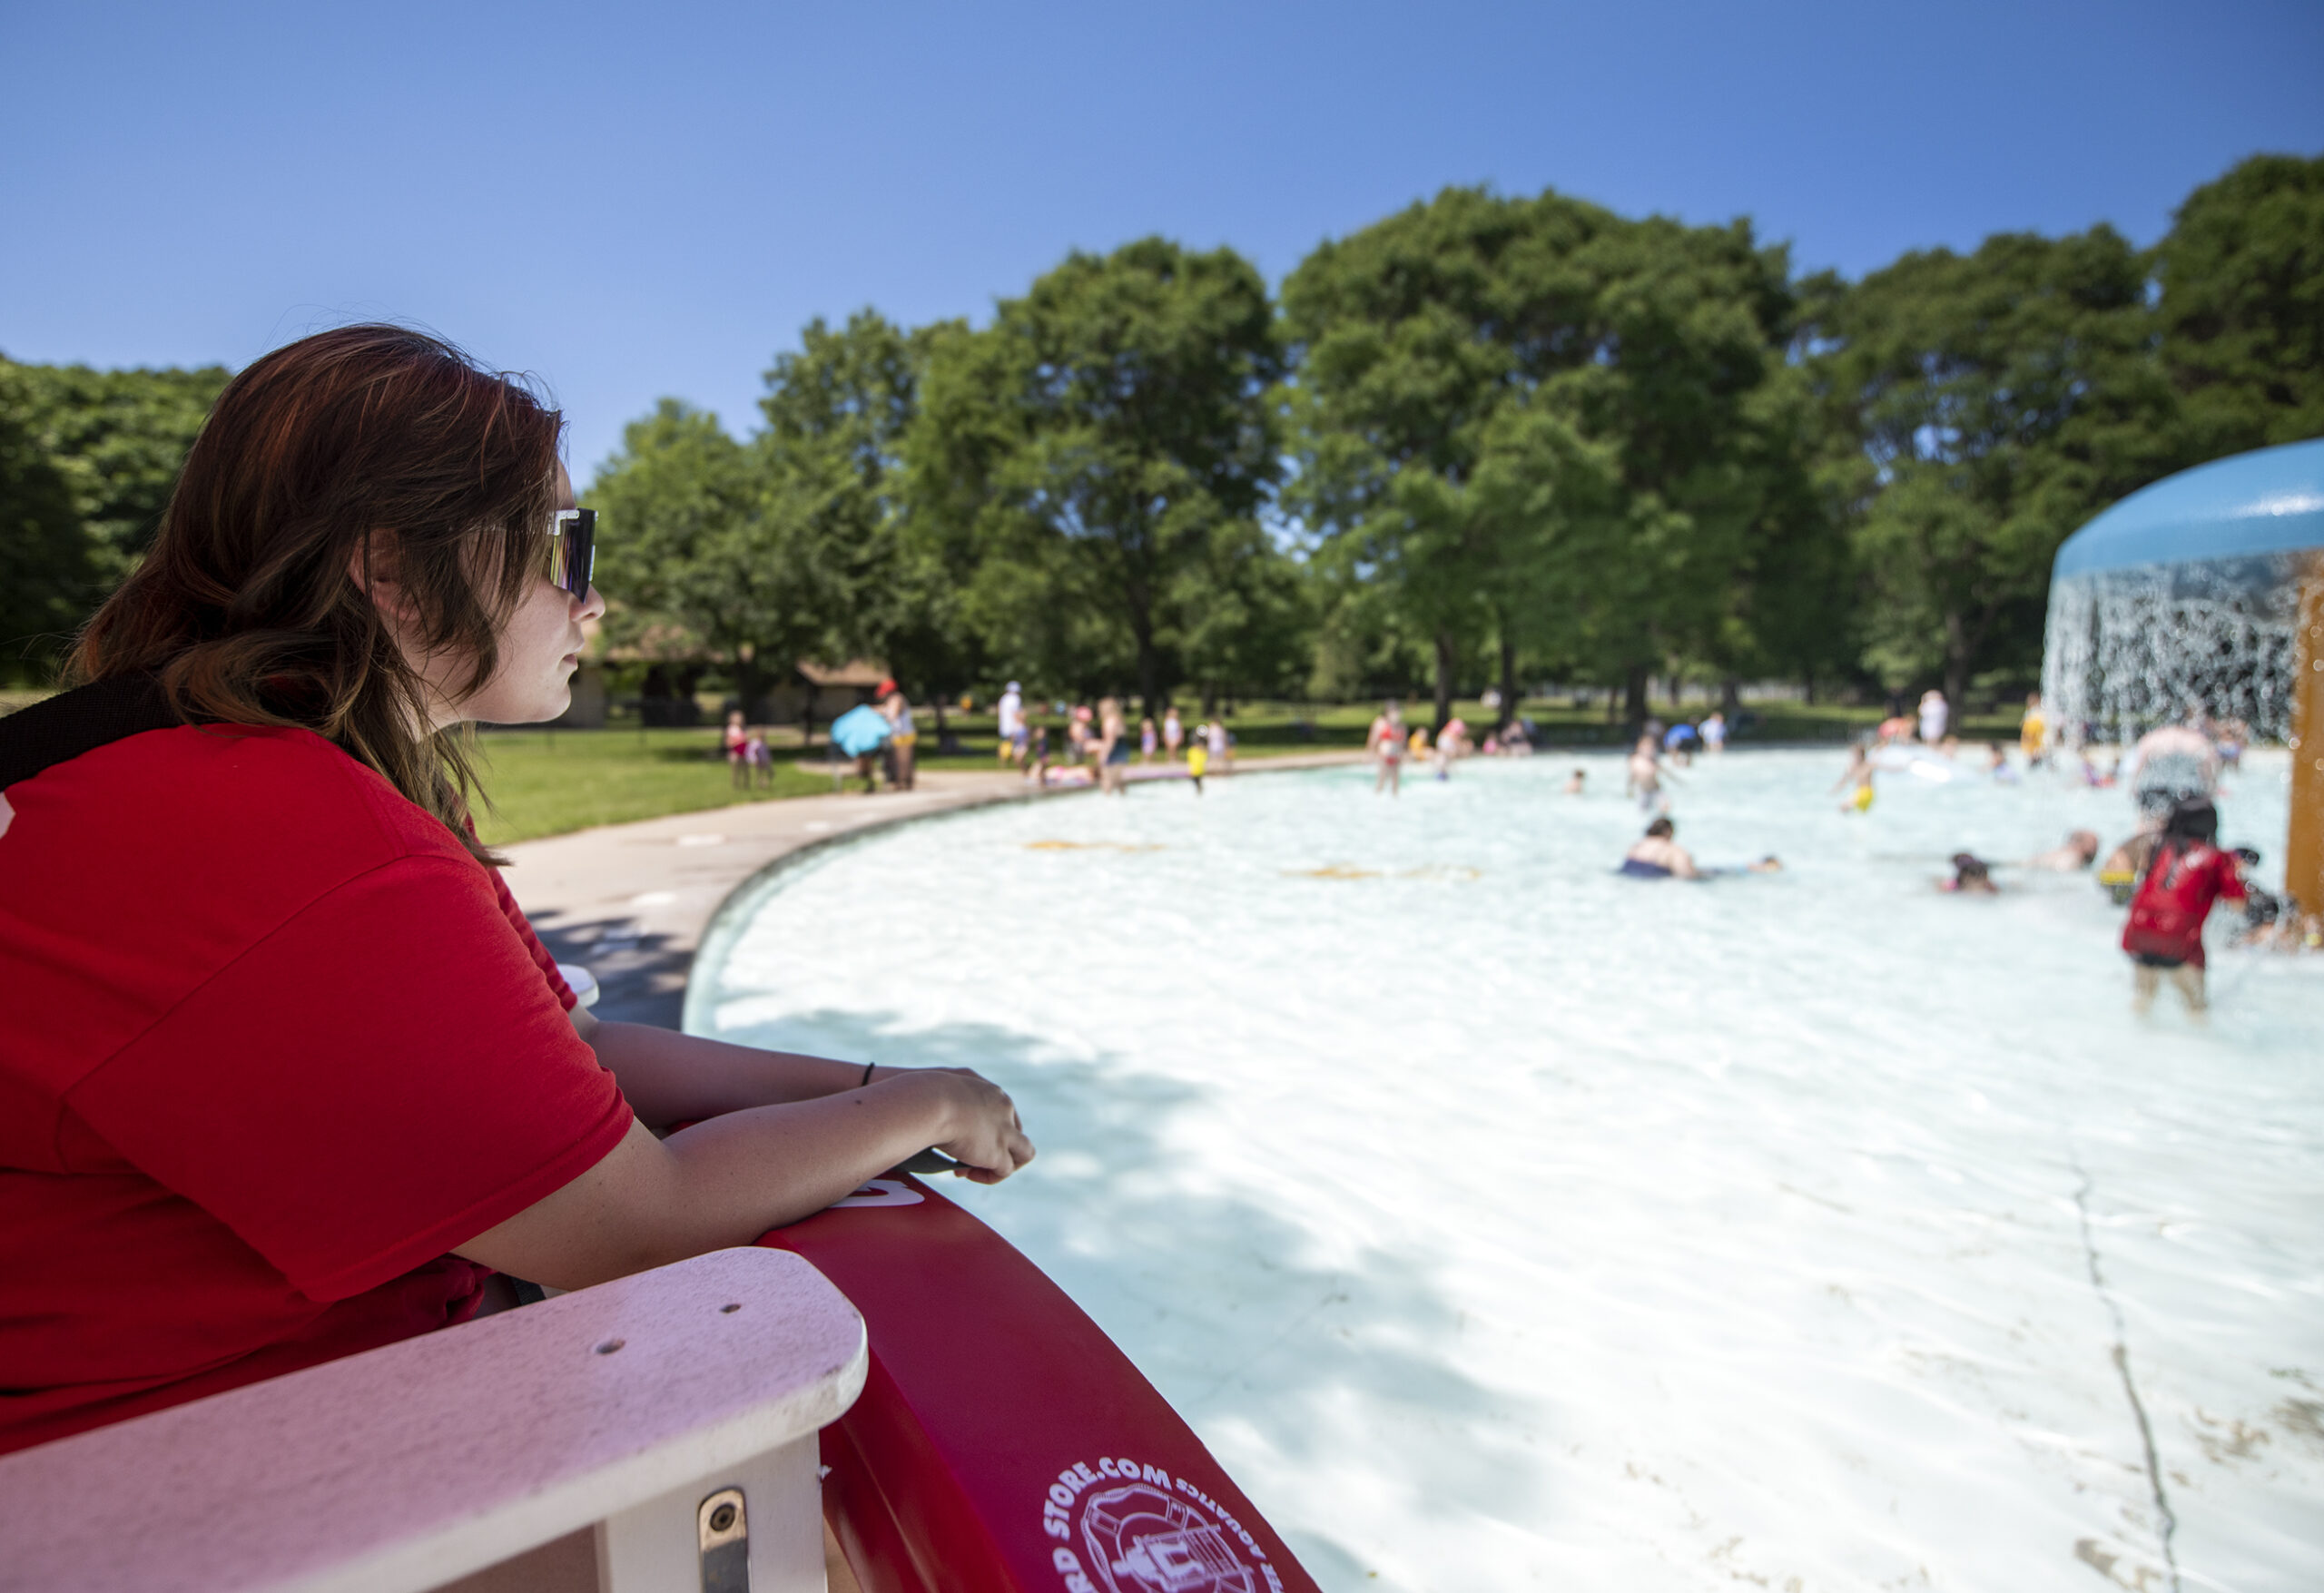 A lifeguard in red clothing watches a splash pool from a raised chair.